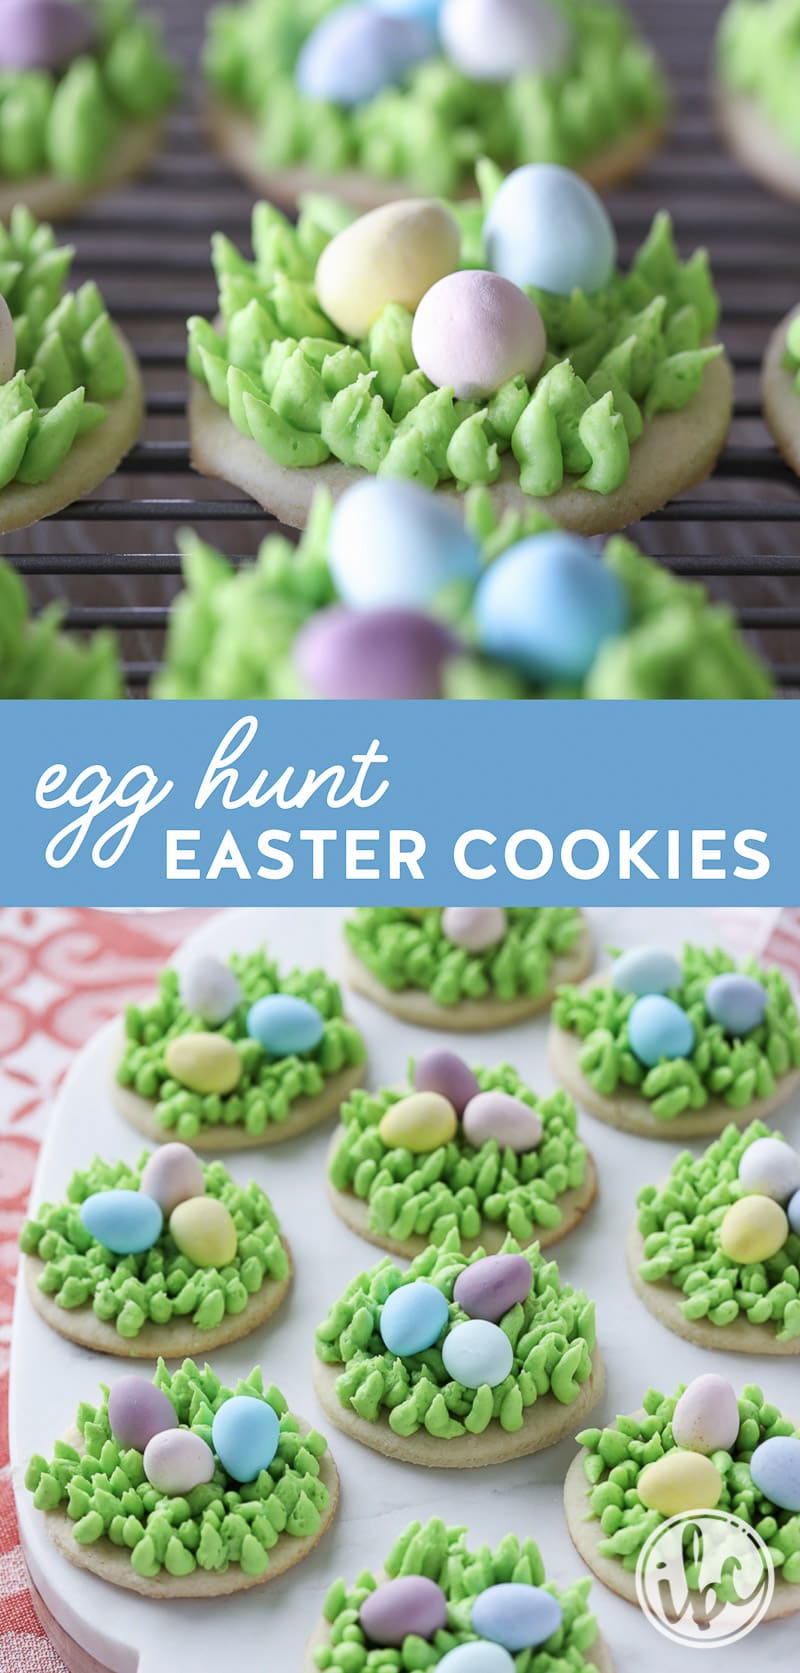 Need a cute #dessert or #cookie #recipe for #Easter? Try these Egg Hunt Easter Cookies!